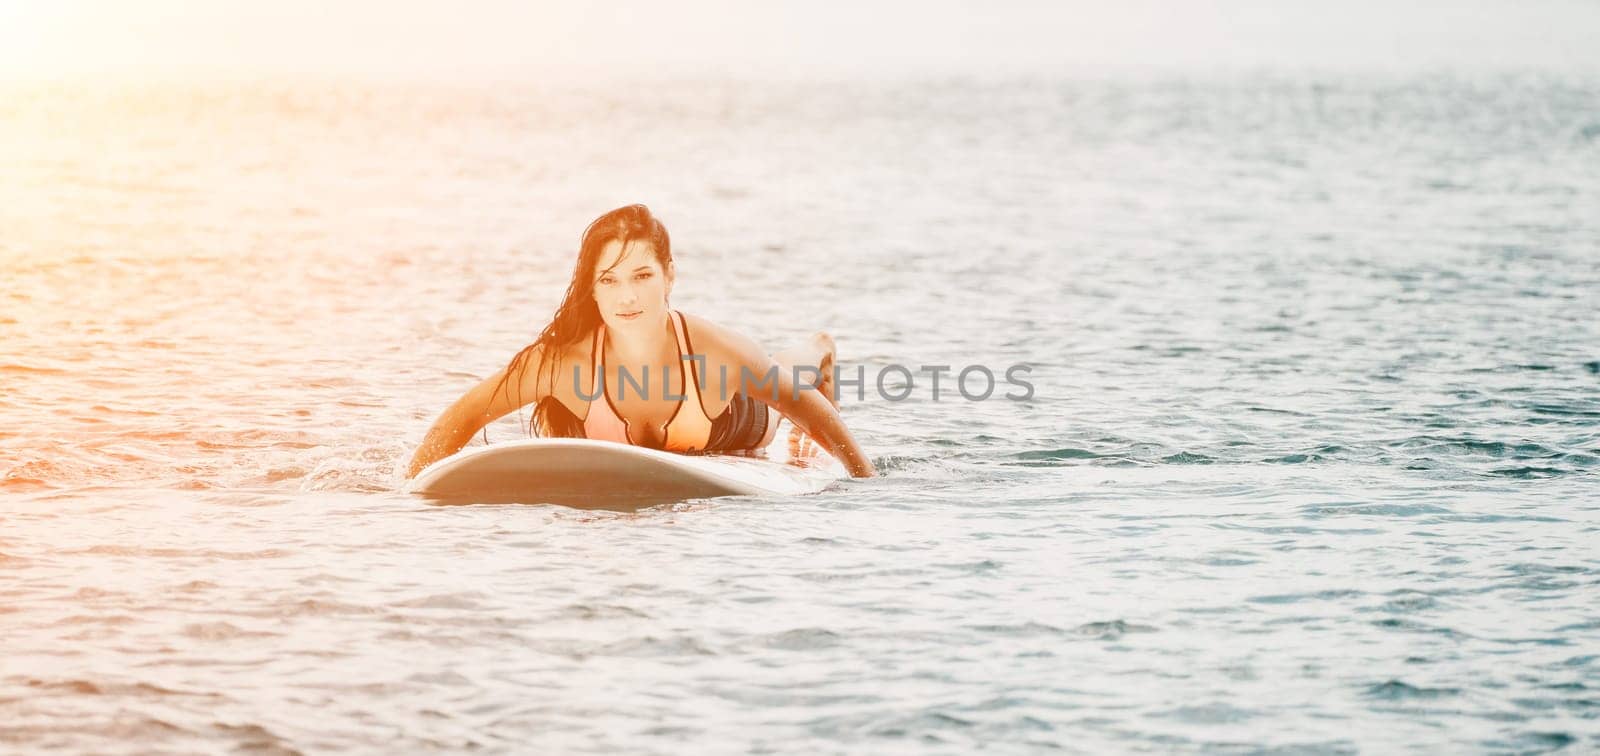 Sea woman sup. Silhouette of happy young woman in pink bikini, surfing on SUP board, confident paddling through water surface. Idyllic sunset. Active lifestyle at sea or river. Slow motion